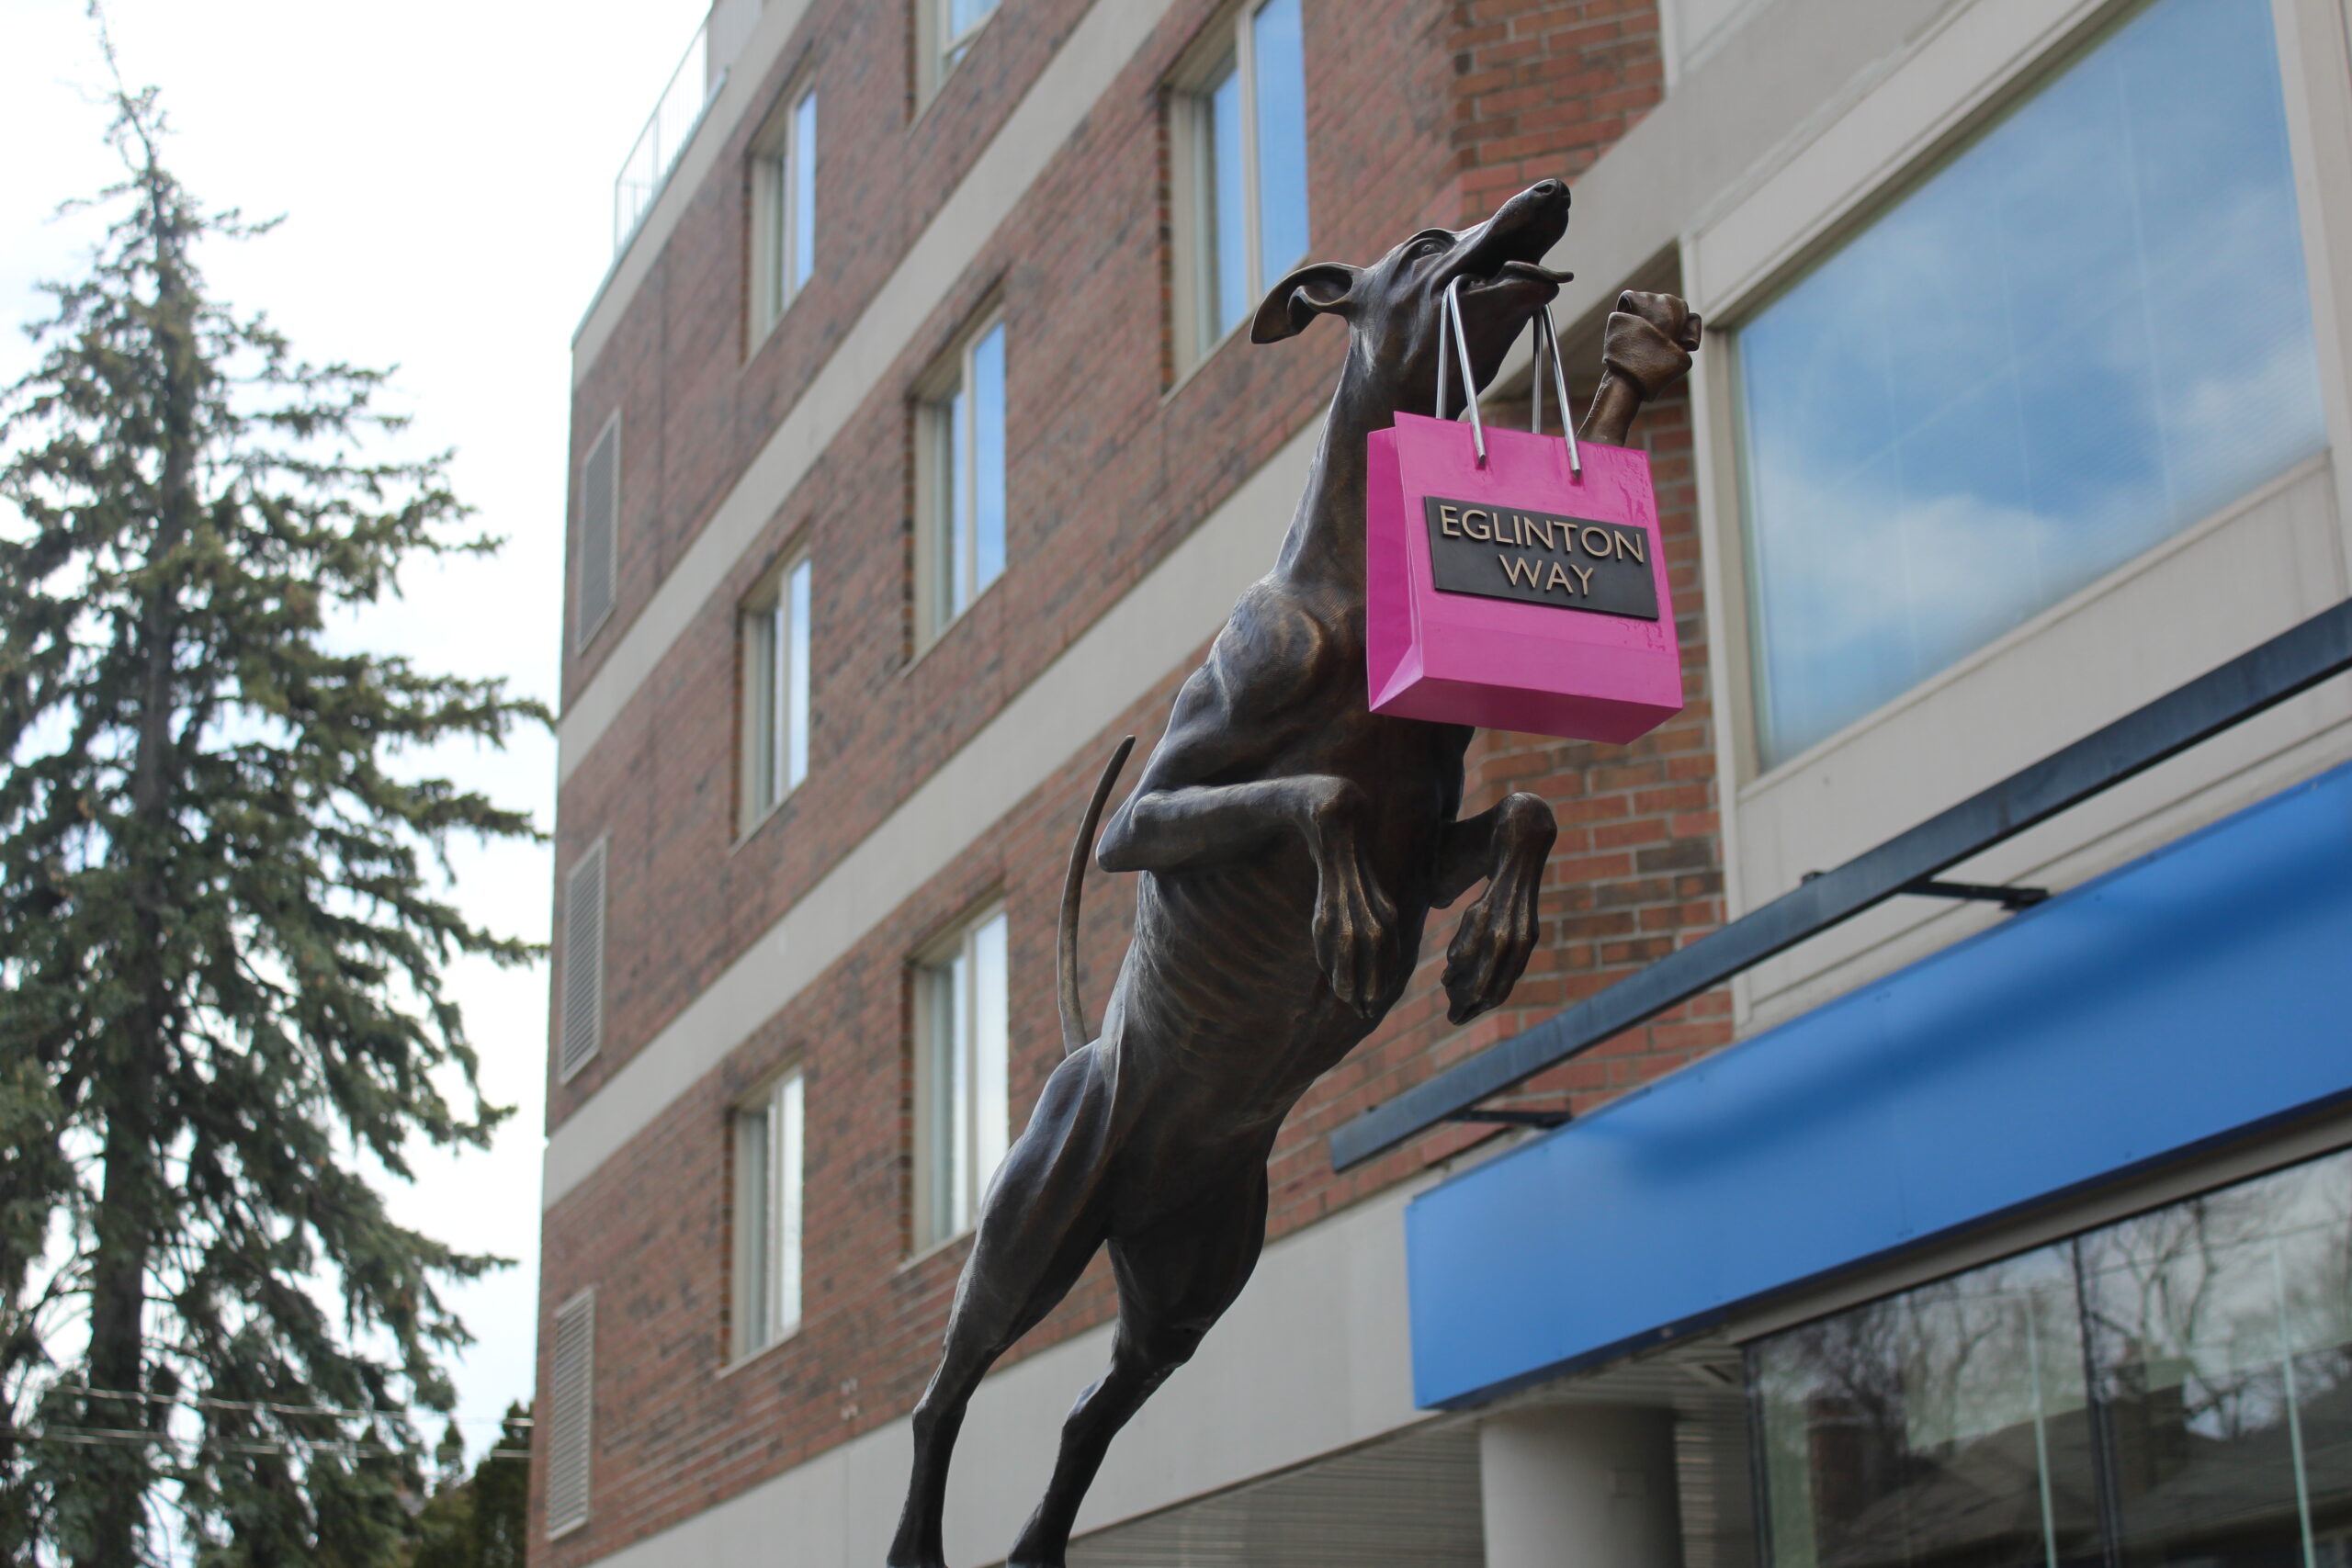 A sculpture by William Hung of a dog leaping forward with a shopping bag in its mouth that says Eglinton Way BIA